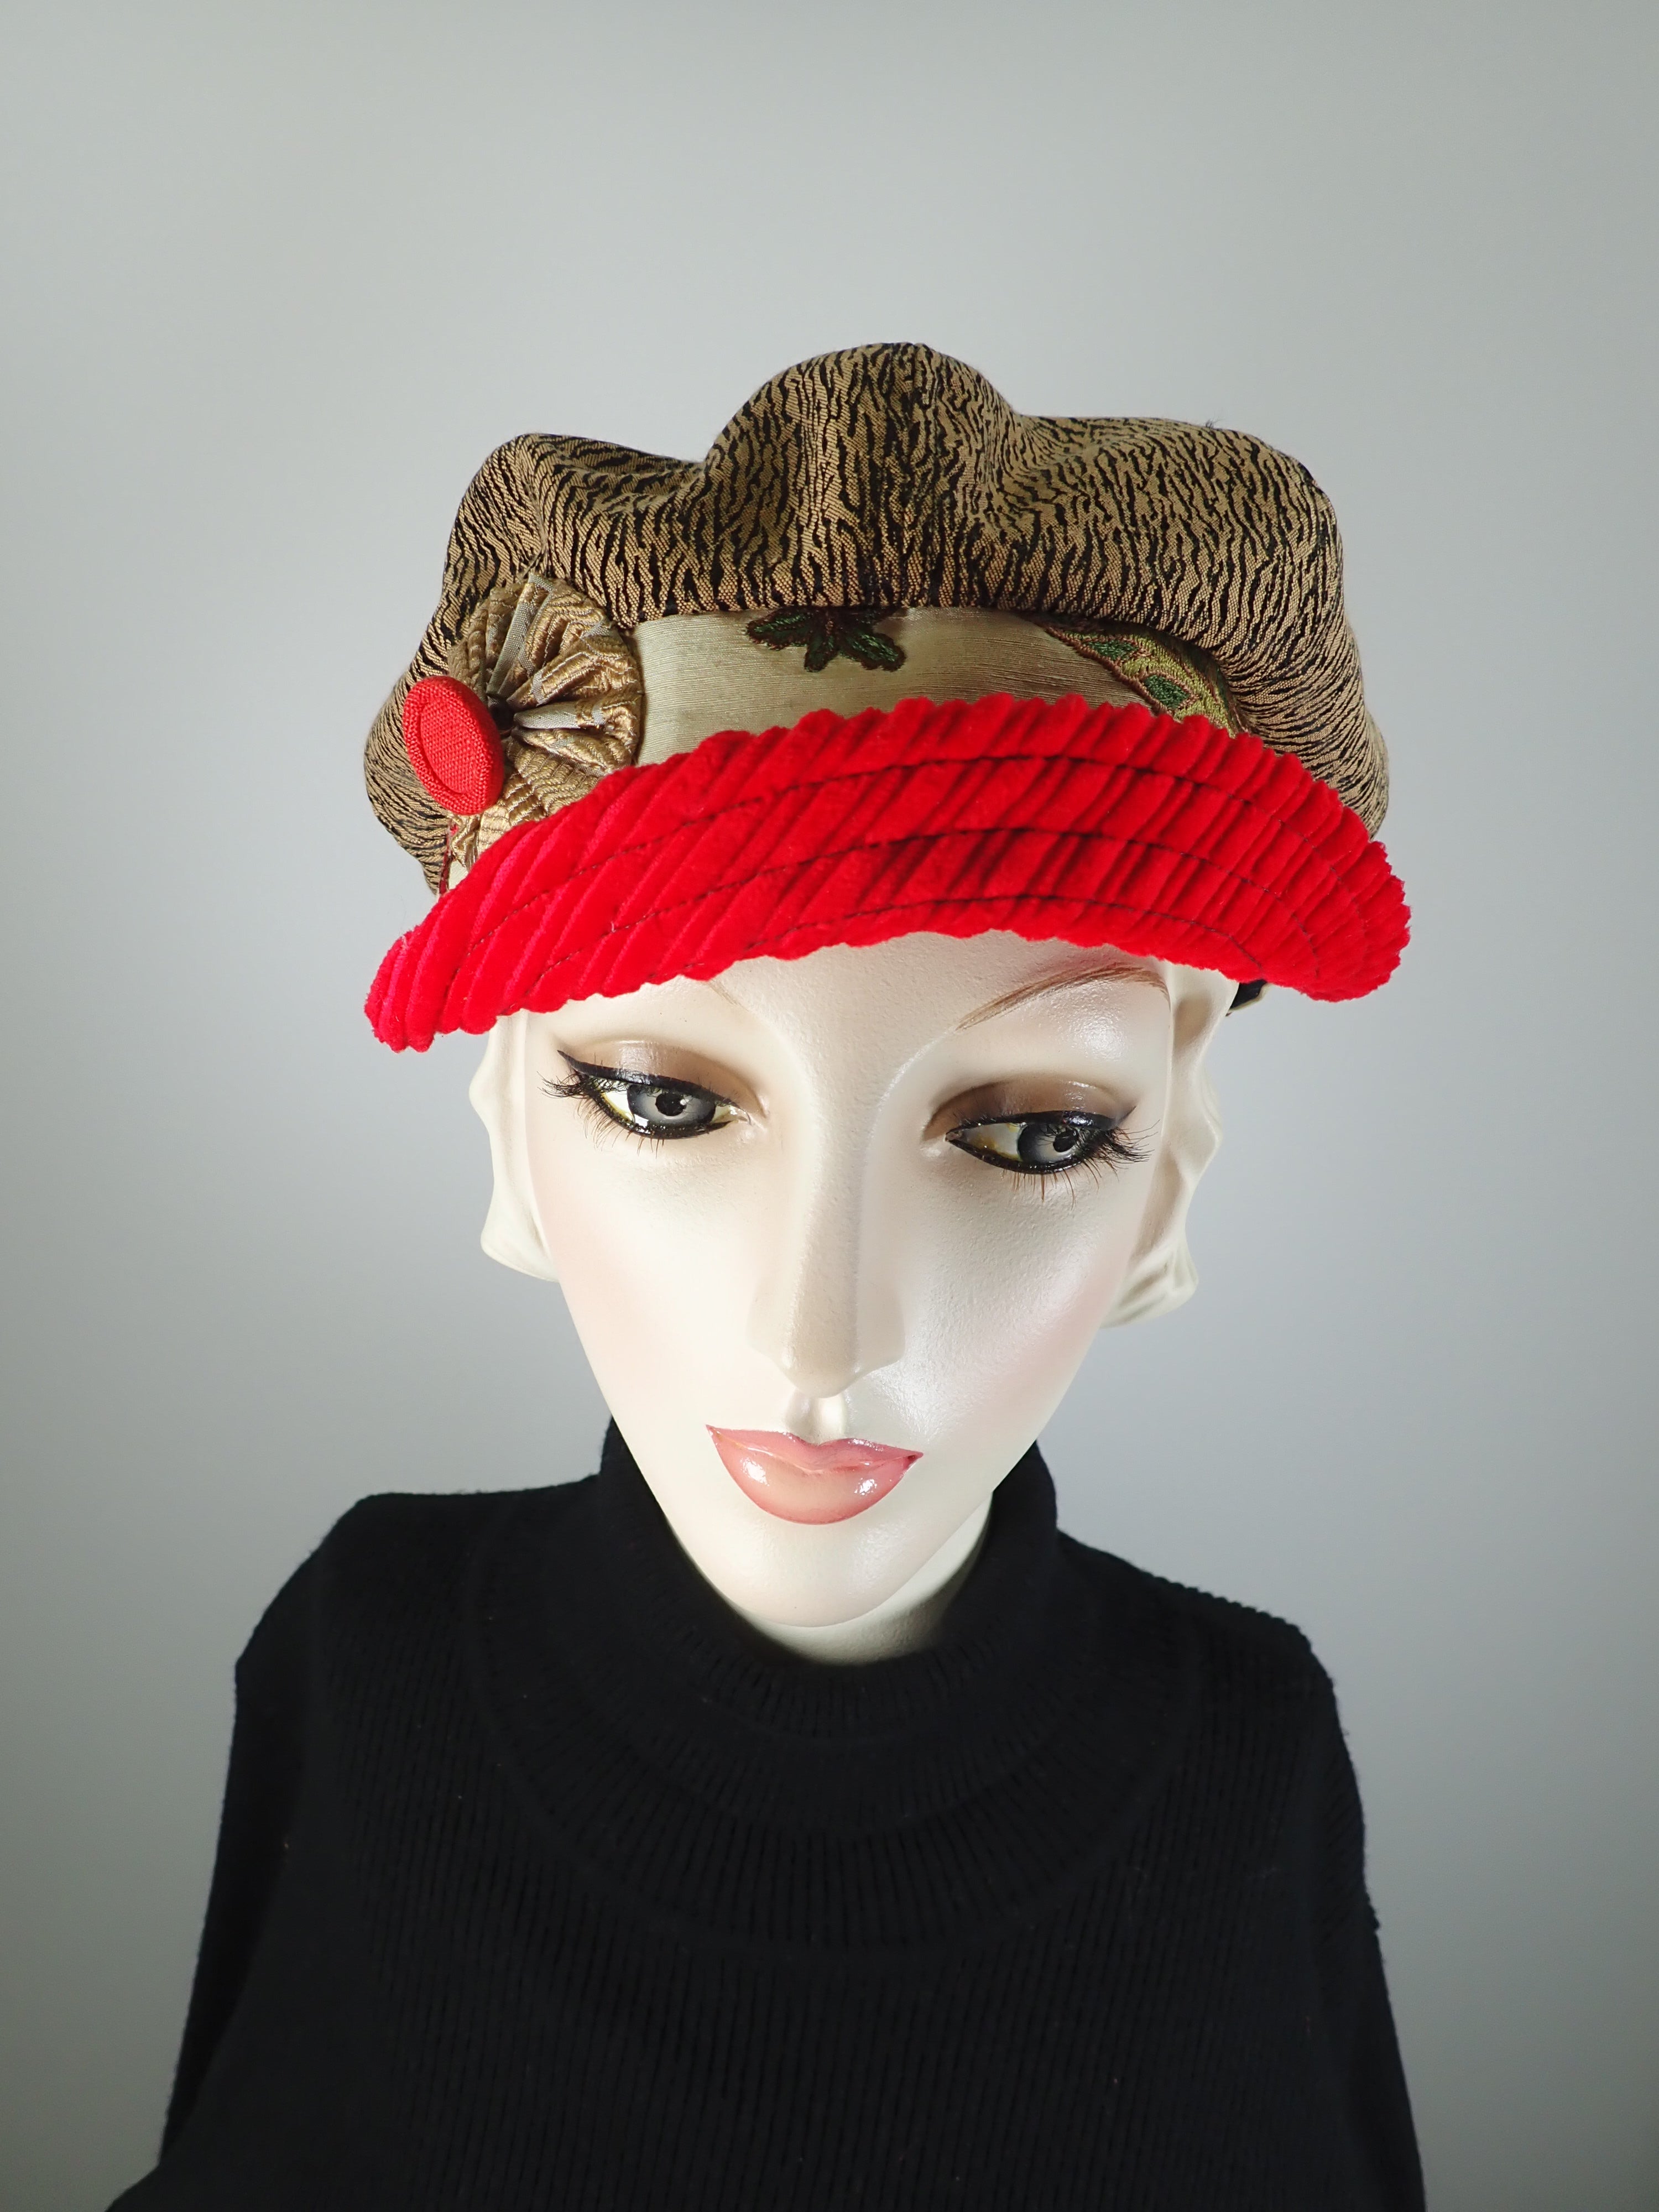 Womens tan red Soft Newsboy Hat. Slouchy Ladies Newsboy Cap. Warm Winter Hat. Sustainable fashion Eco friendly hat.